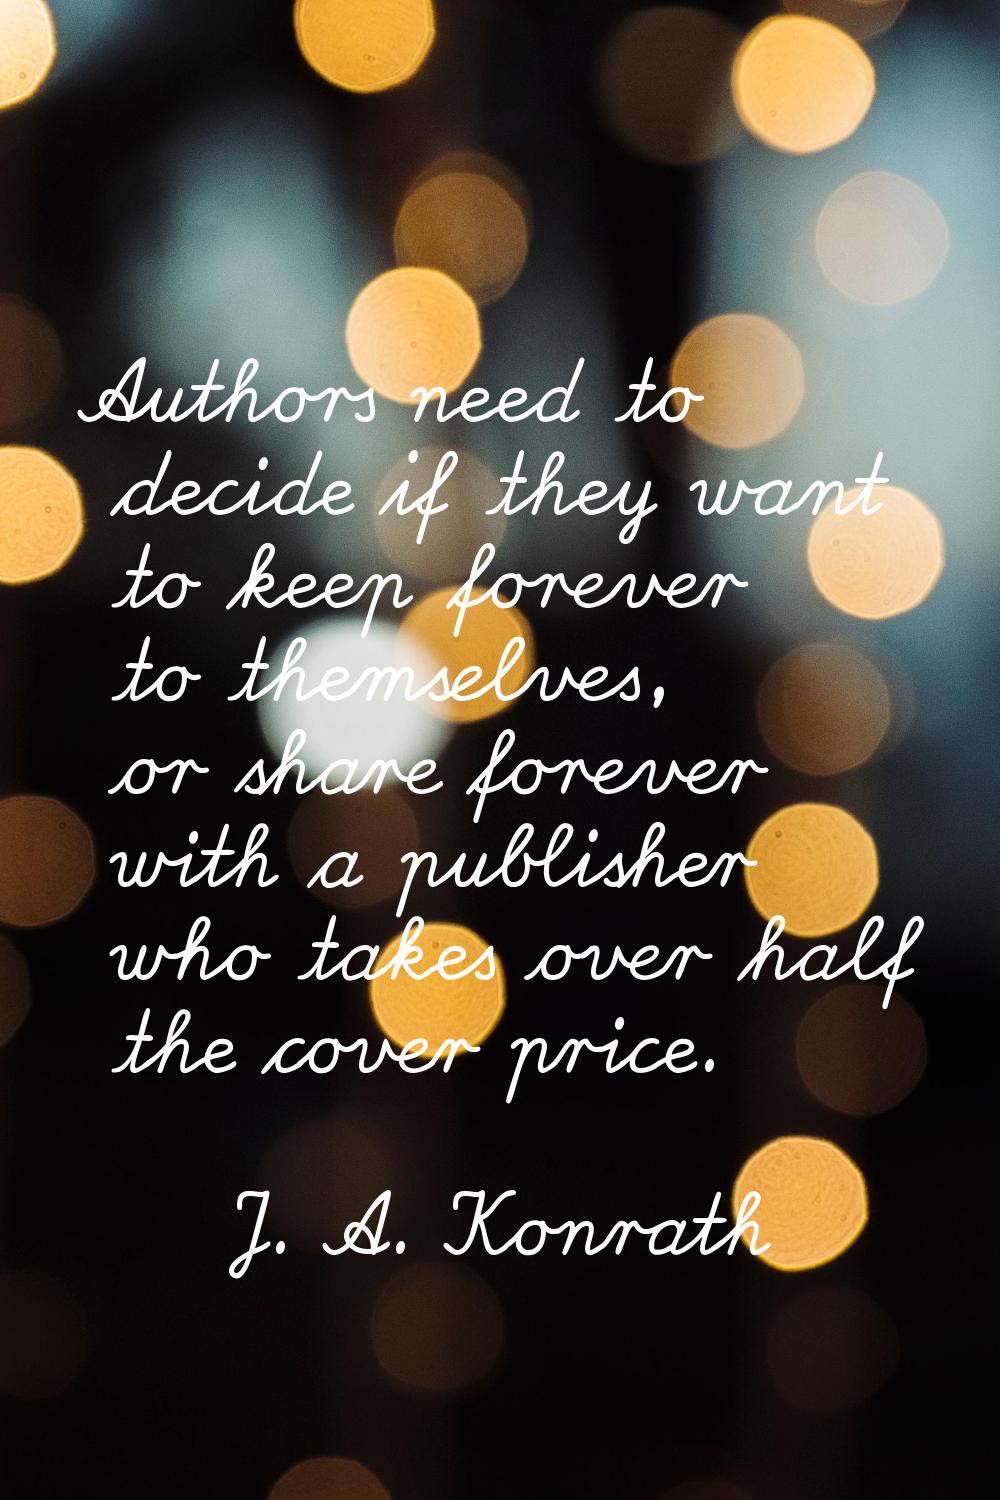 Authors need to decide if they want to keep forever to themselves, or share forever with a publishe